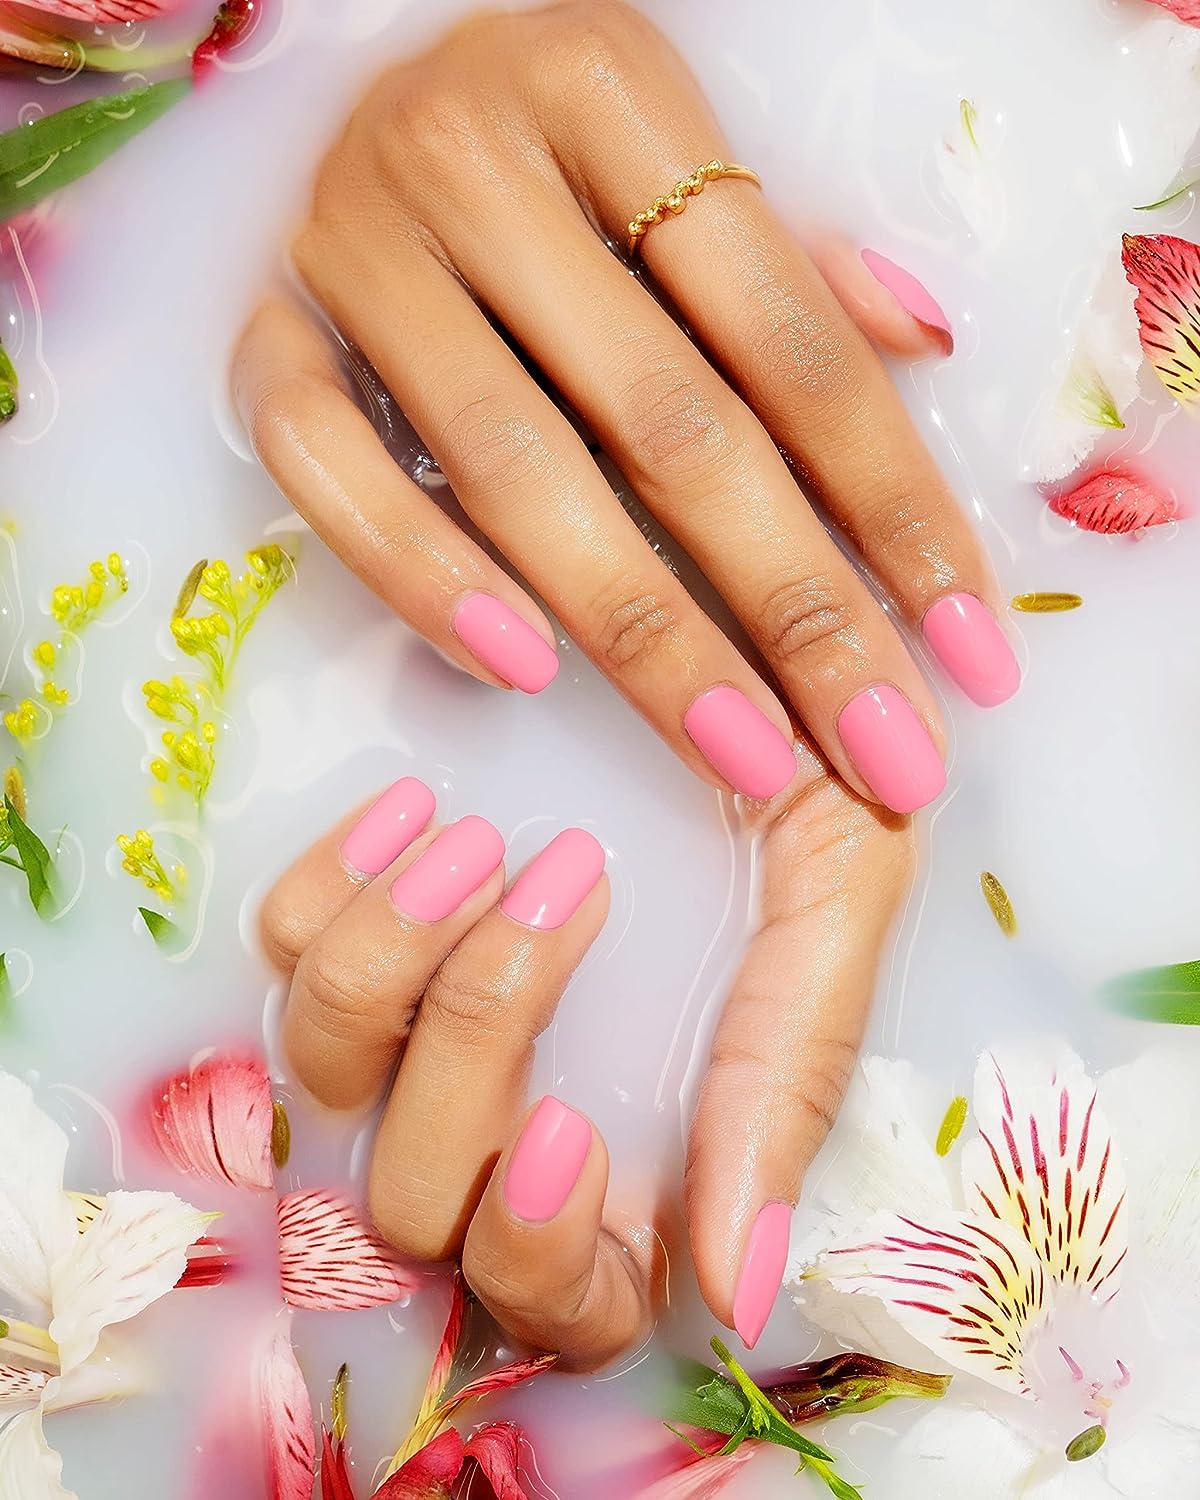 Pure Beauty - Gelish Spring 2023 Collection